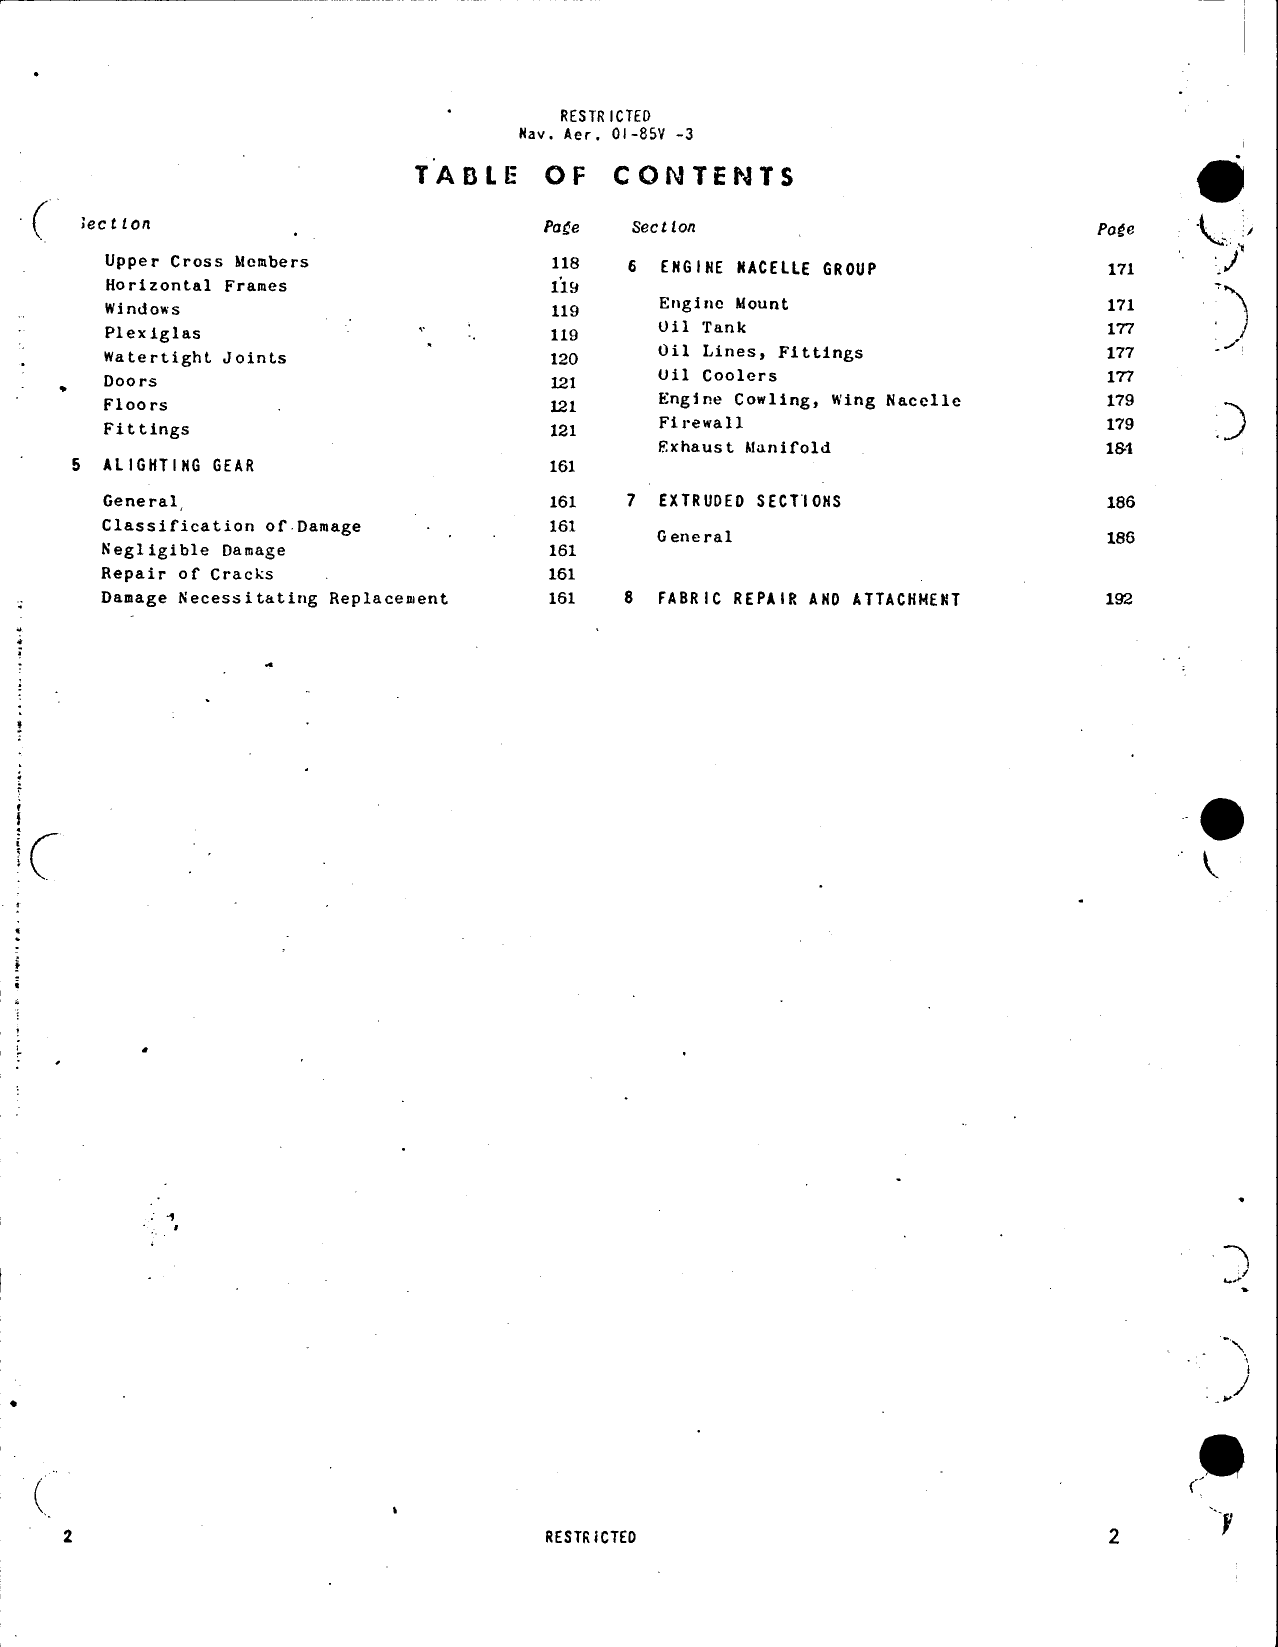 Sample page  5 from AirCorps Library document: Structural Repair - Grumman Goose - JRF-1, JRF-2, JRF-3, JRF-4, JRF-5, JRF-6B